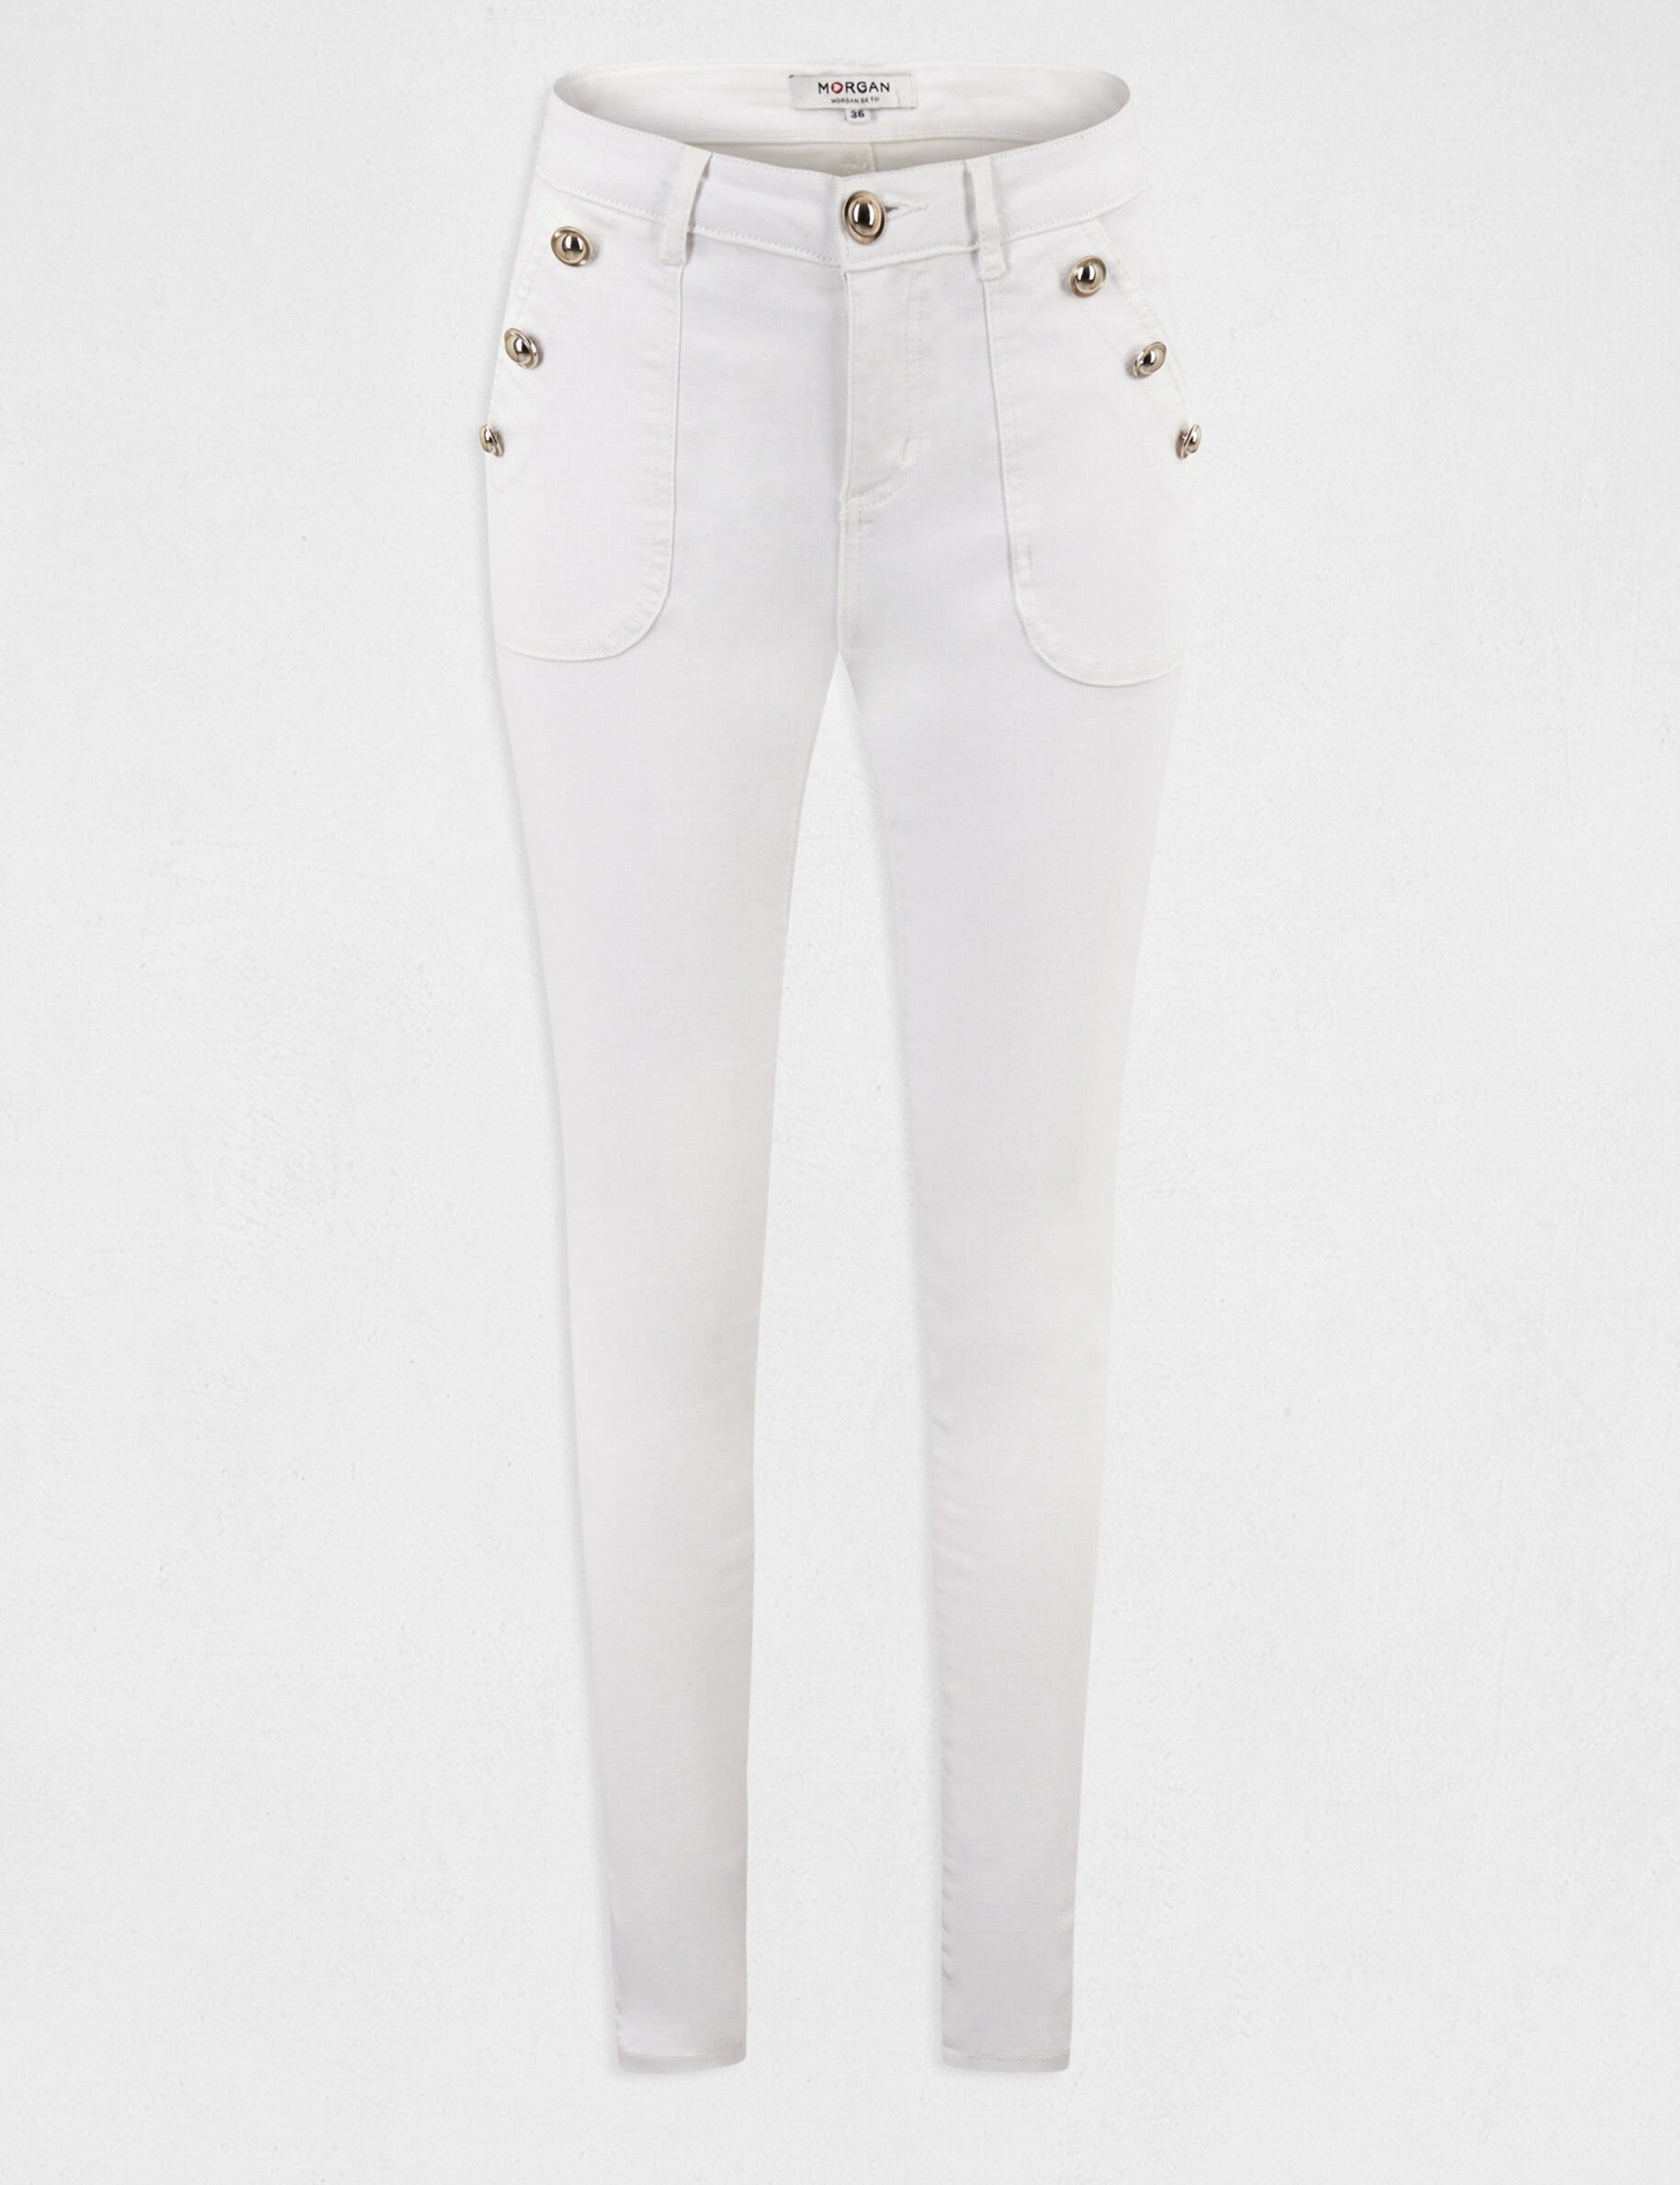 Stone Button Up Faux Leather Skinny Trousers  PrettyLittleThing